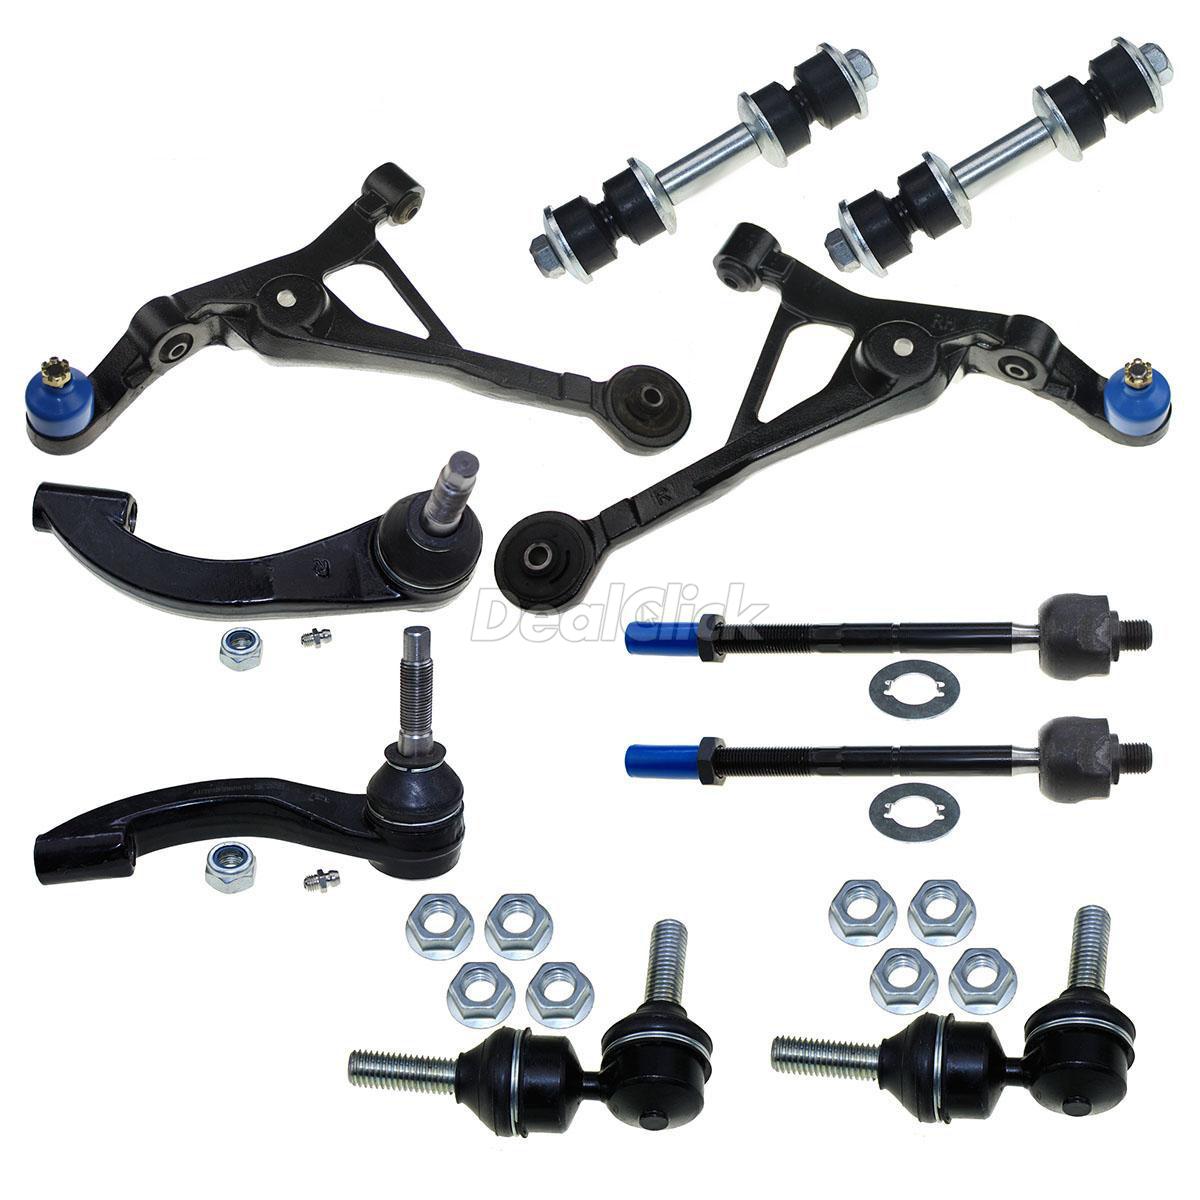 Stratus Sebring Cirrus Breeze Front Lower Control Arm Ball Joint Sway Bar Kit